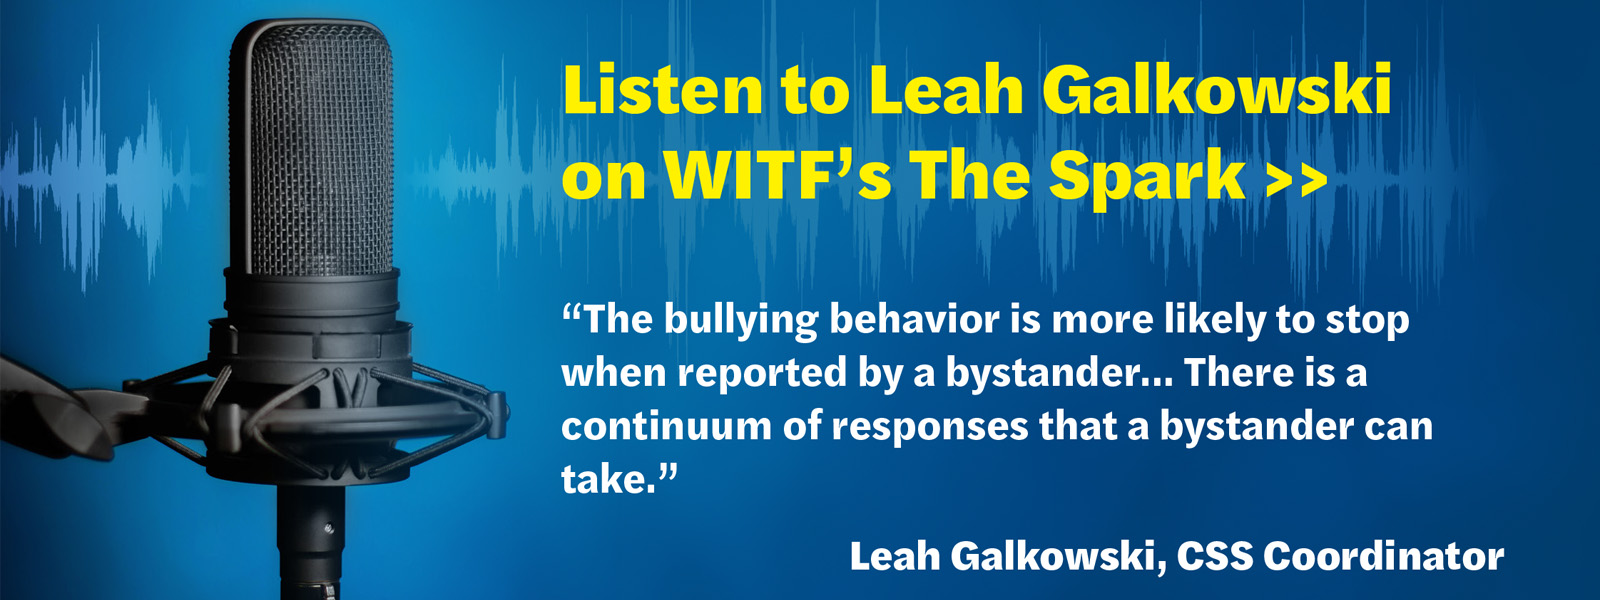 Listen to Leah Galkowski on WITF's The Spark